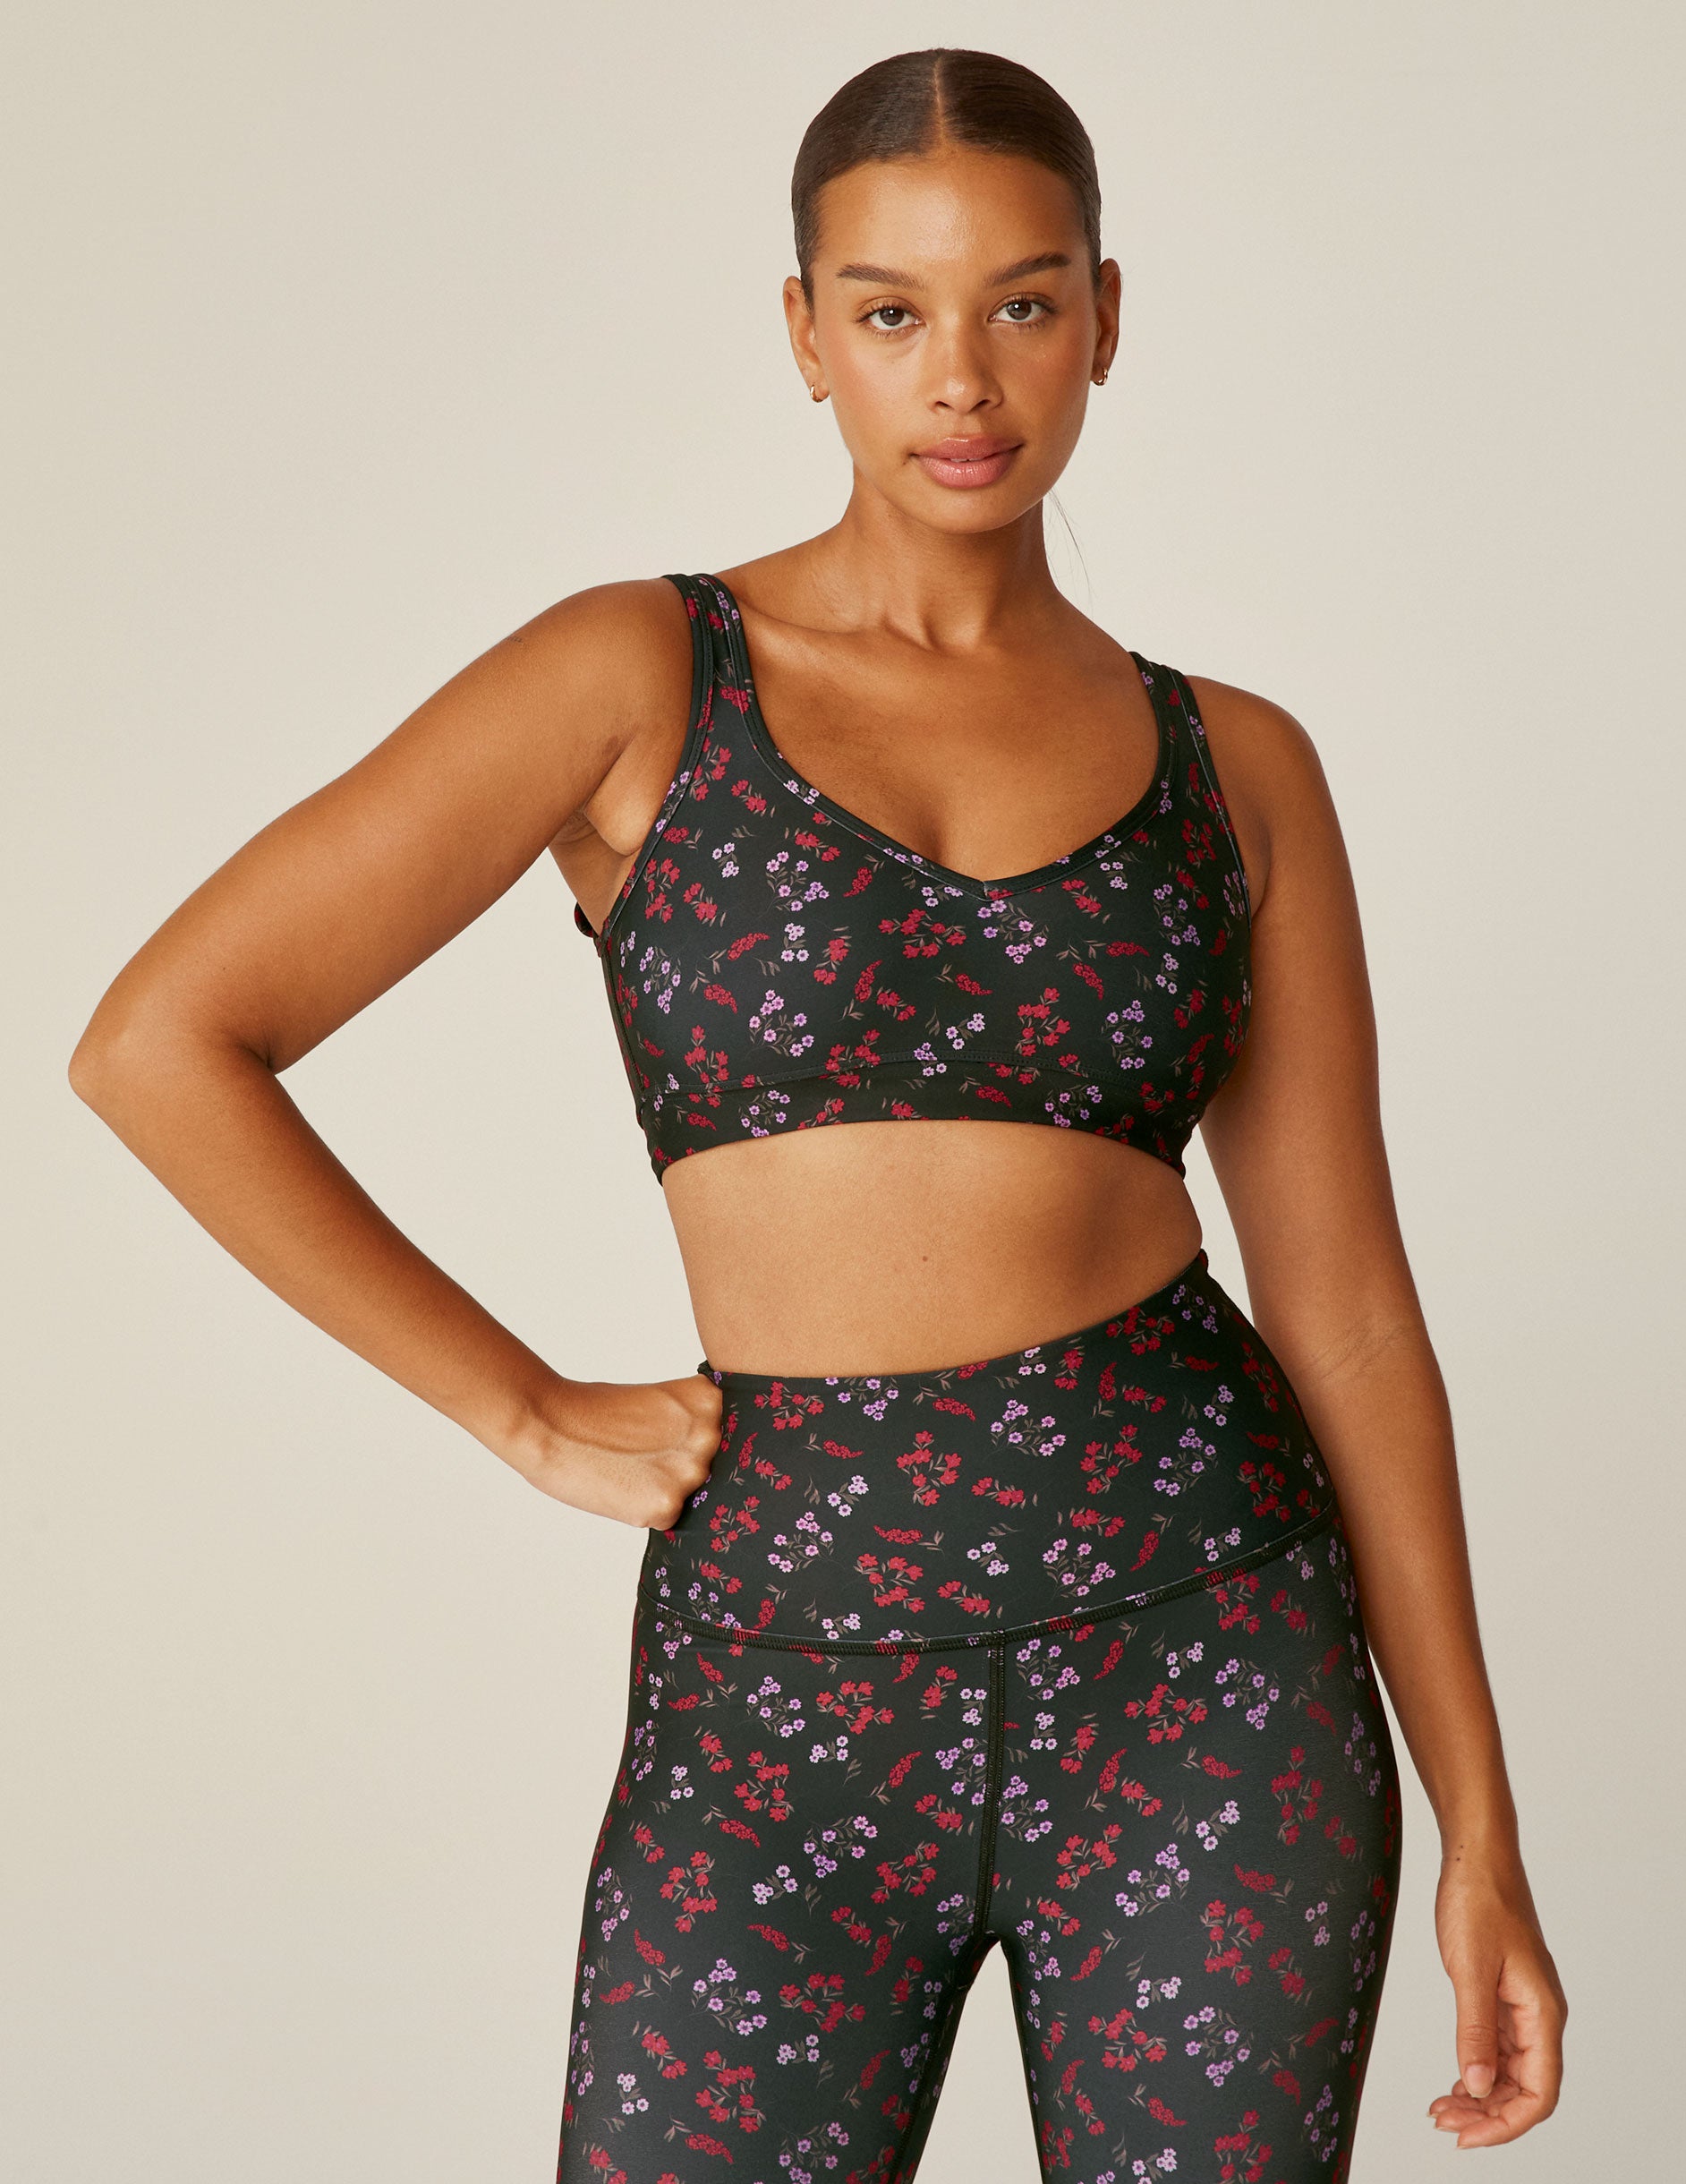 Our Underoutfit bra is so comfortable you'll forget you even own